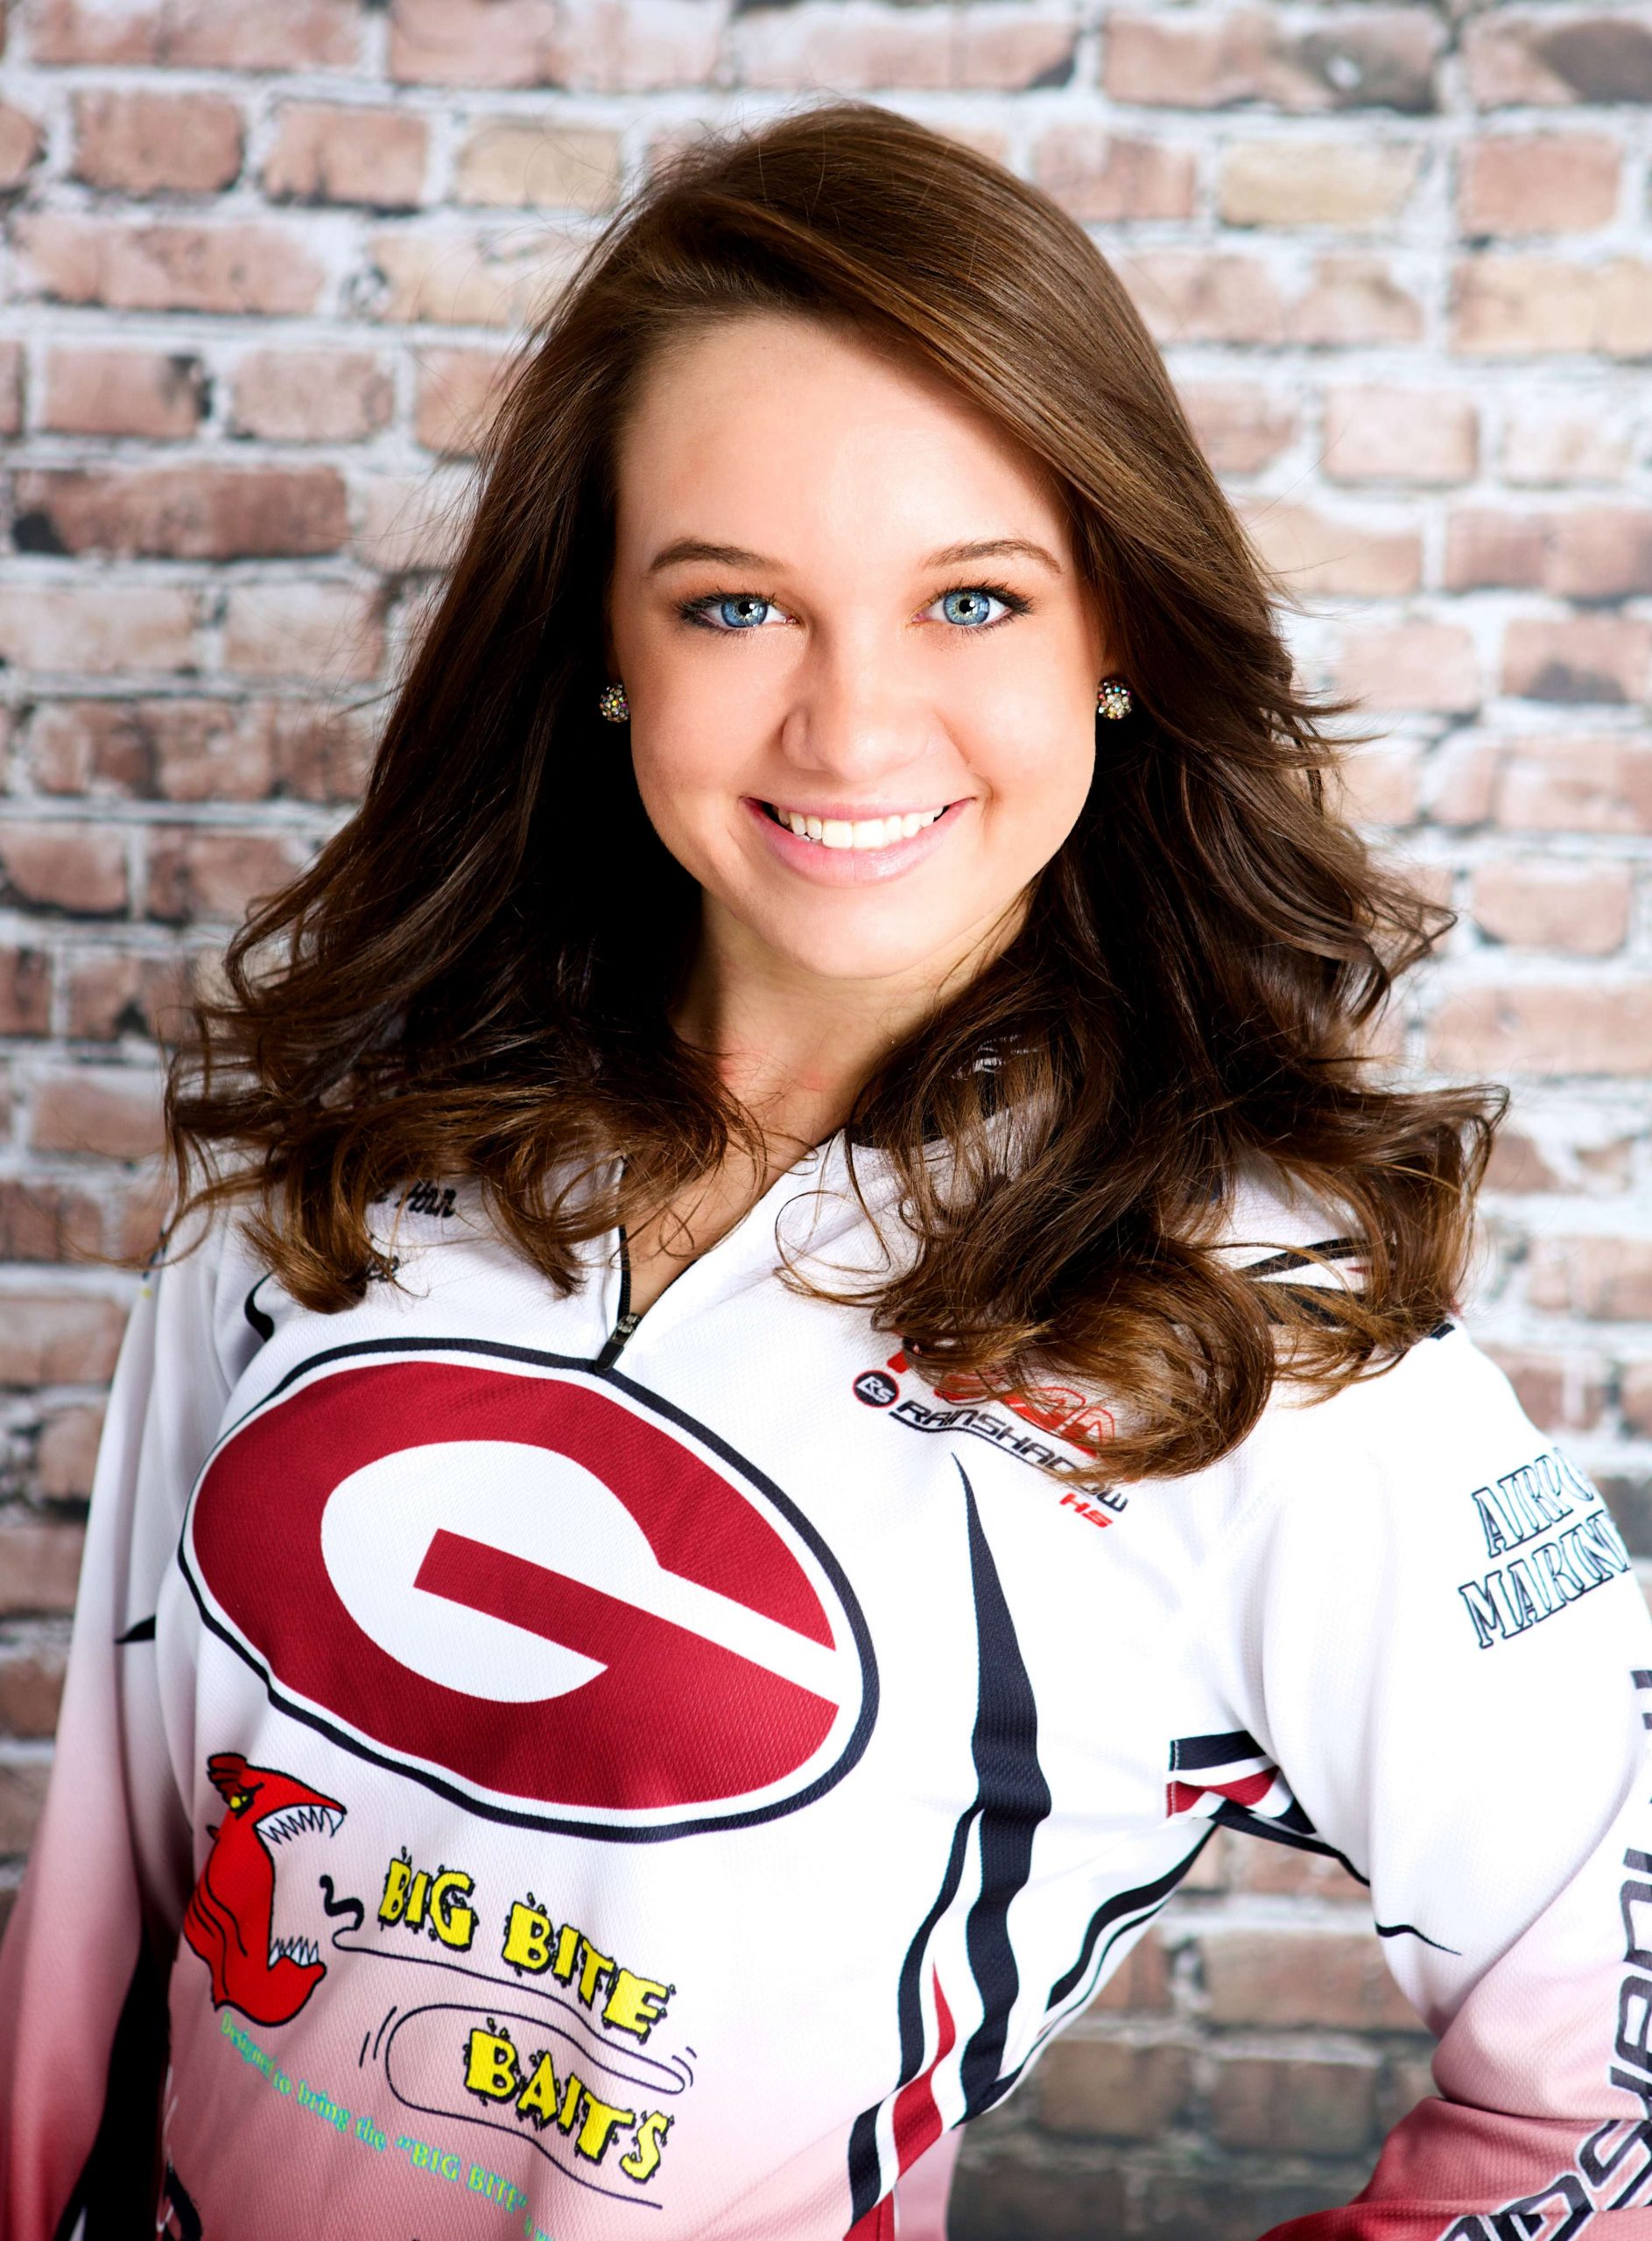 <p>Alabama: Laura Ann Foshee</p>
<p>Foshee is a junior at Gardendale High School. She has two tournament wins to her credit and she founded her high school's fishing team. She helped create a benefit tournament to raise money for the Outdoor Ability Foundation, which provides equipment to children with disabilities to help them go hunting and fishing. Foshee is also a member of Team Pink Fishing, which raises funds for breast cancer research.